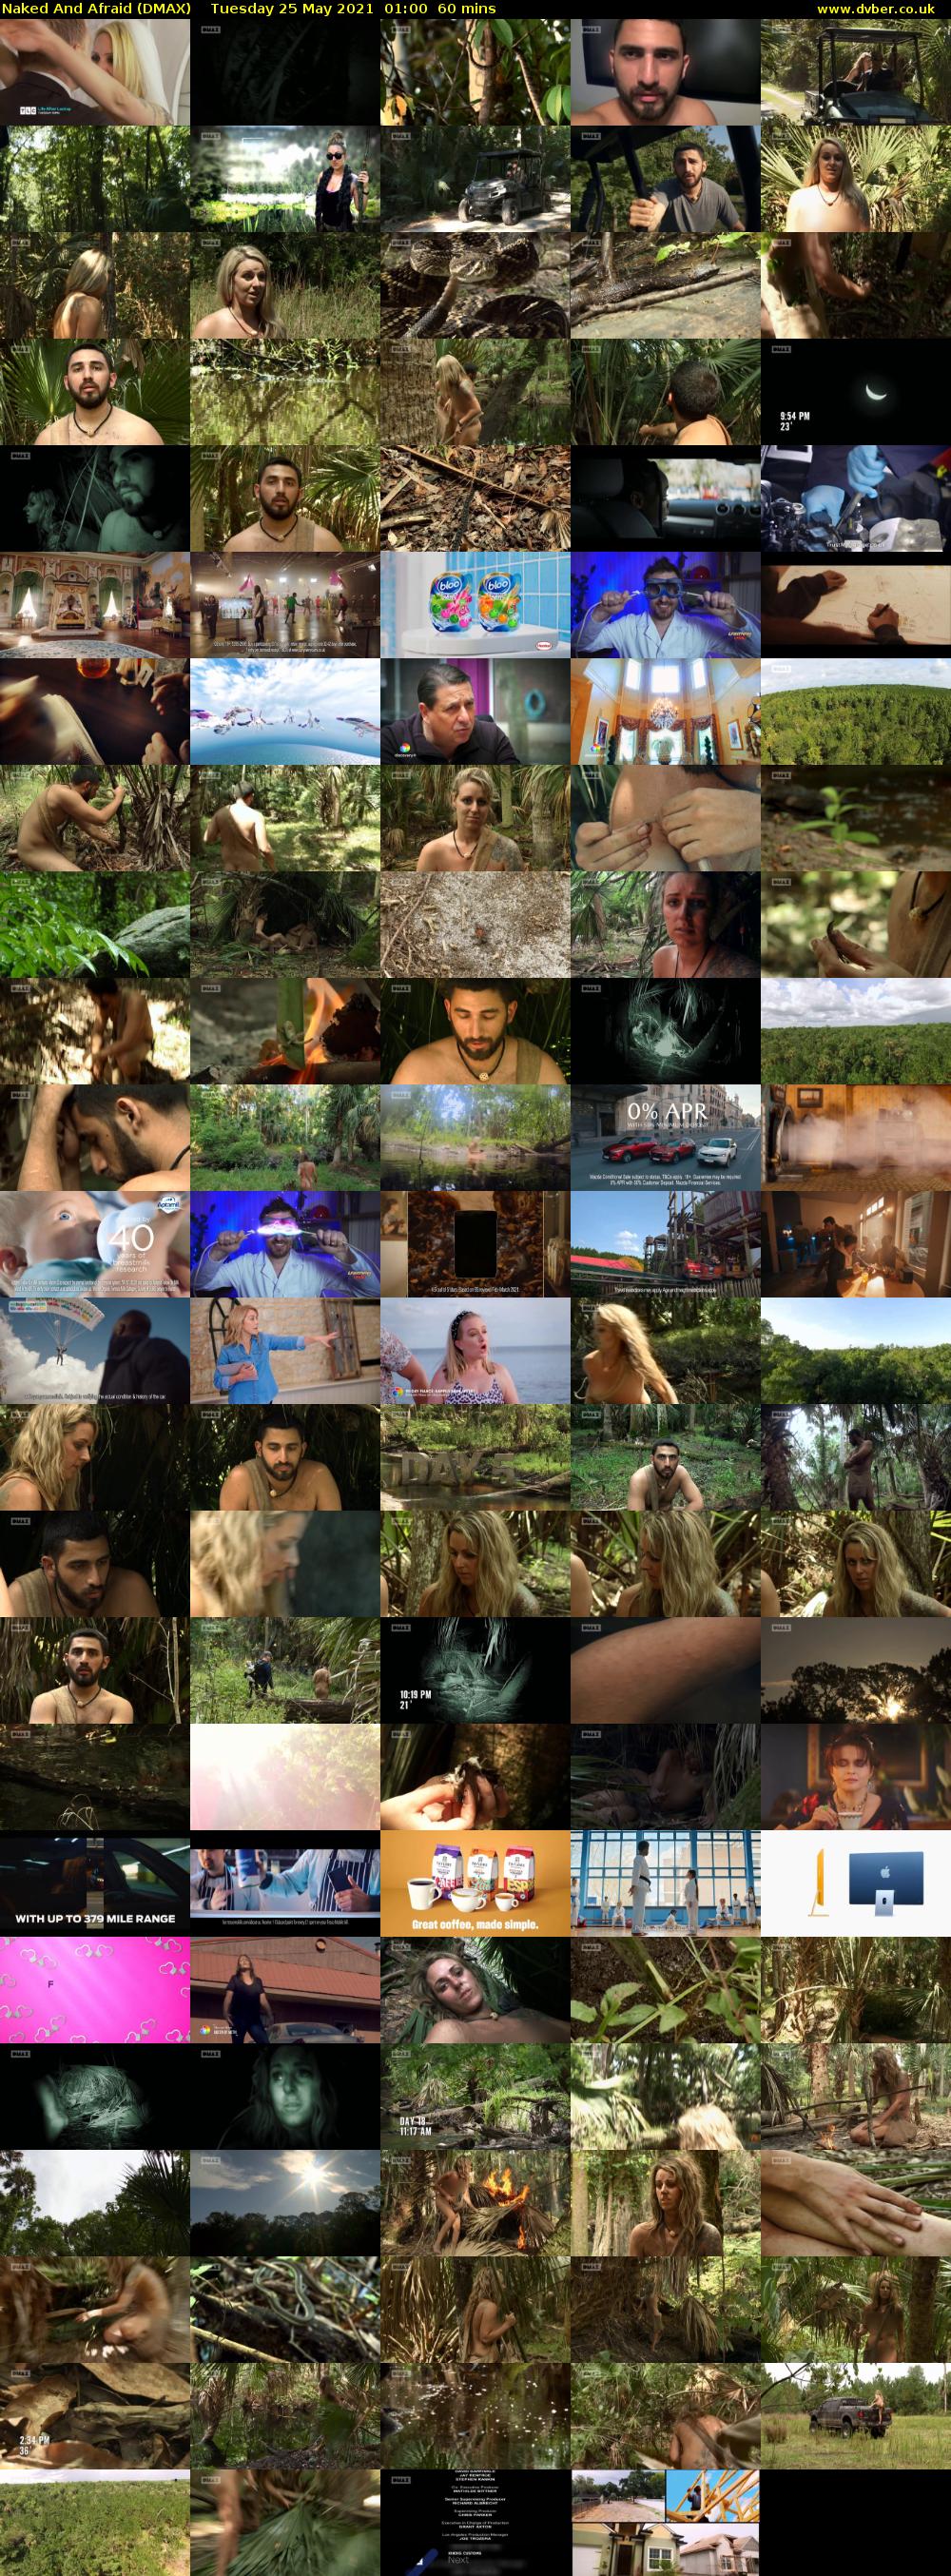 Naked And Afraid (DMAX) Tuesday 25 May 2021 01:00 - 02:00